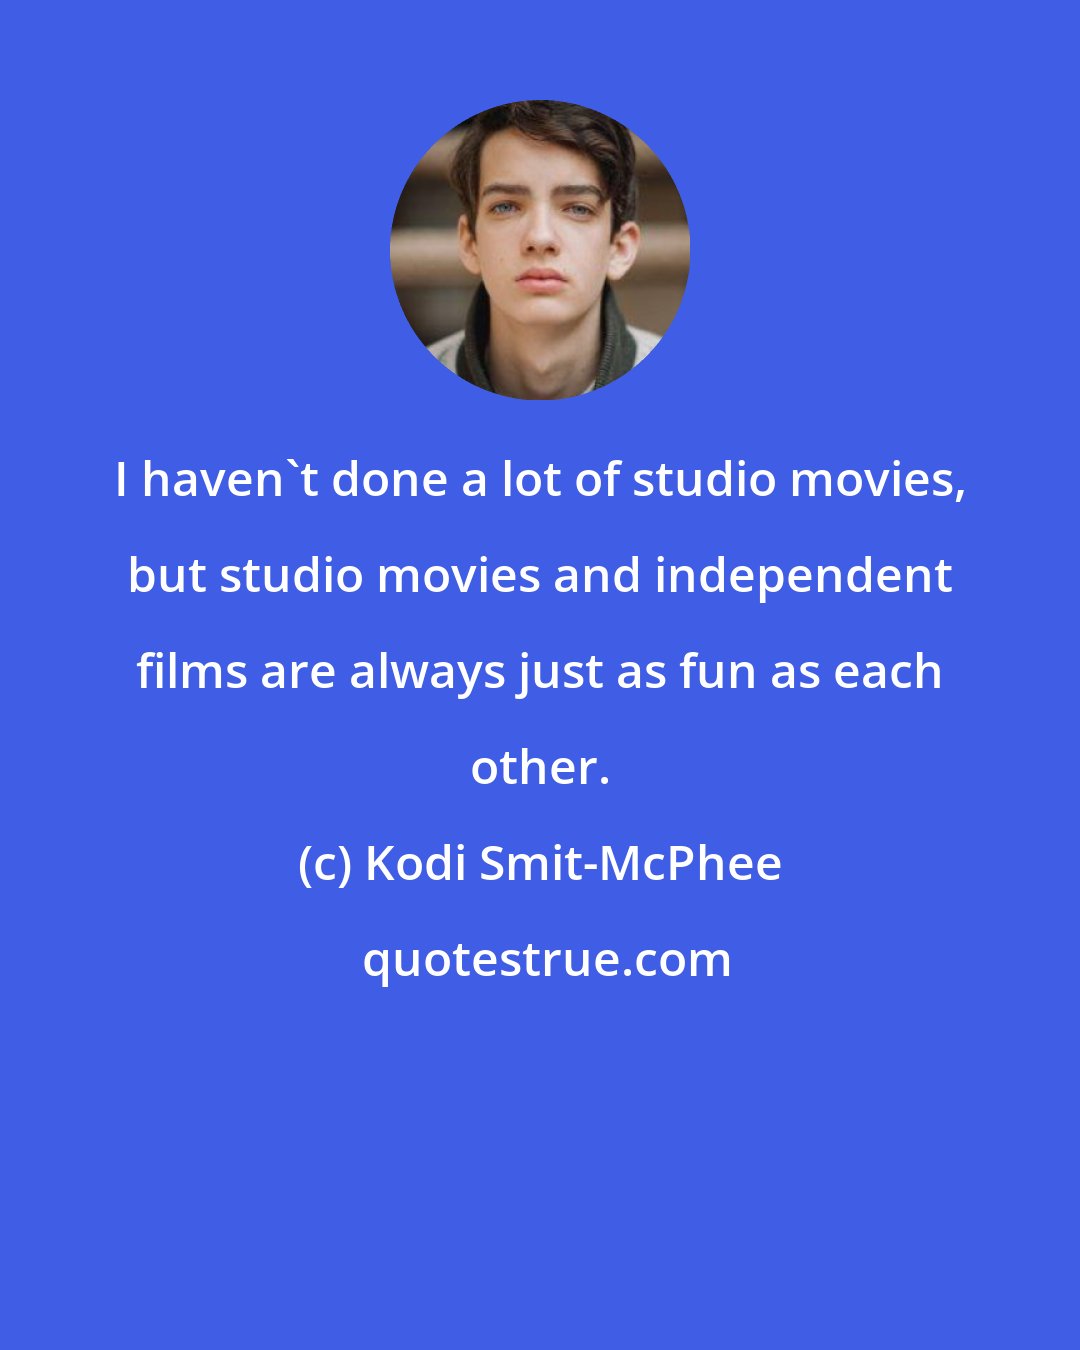 Kodi Smit-McPhee: I haven't done a lot of studio movies, but studio movies and independent films are always just as fun as each other.